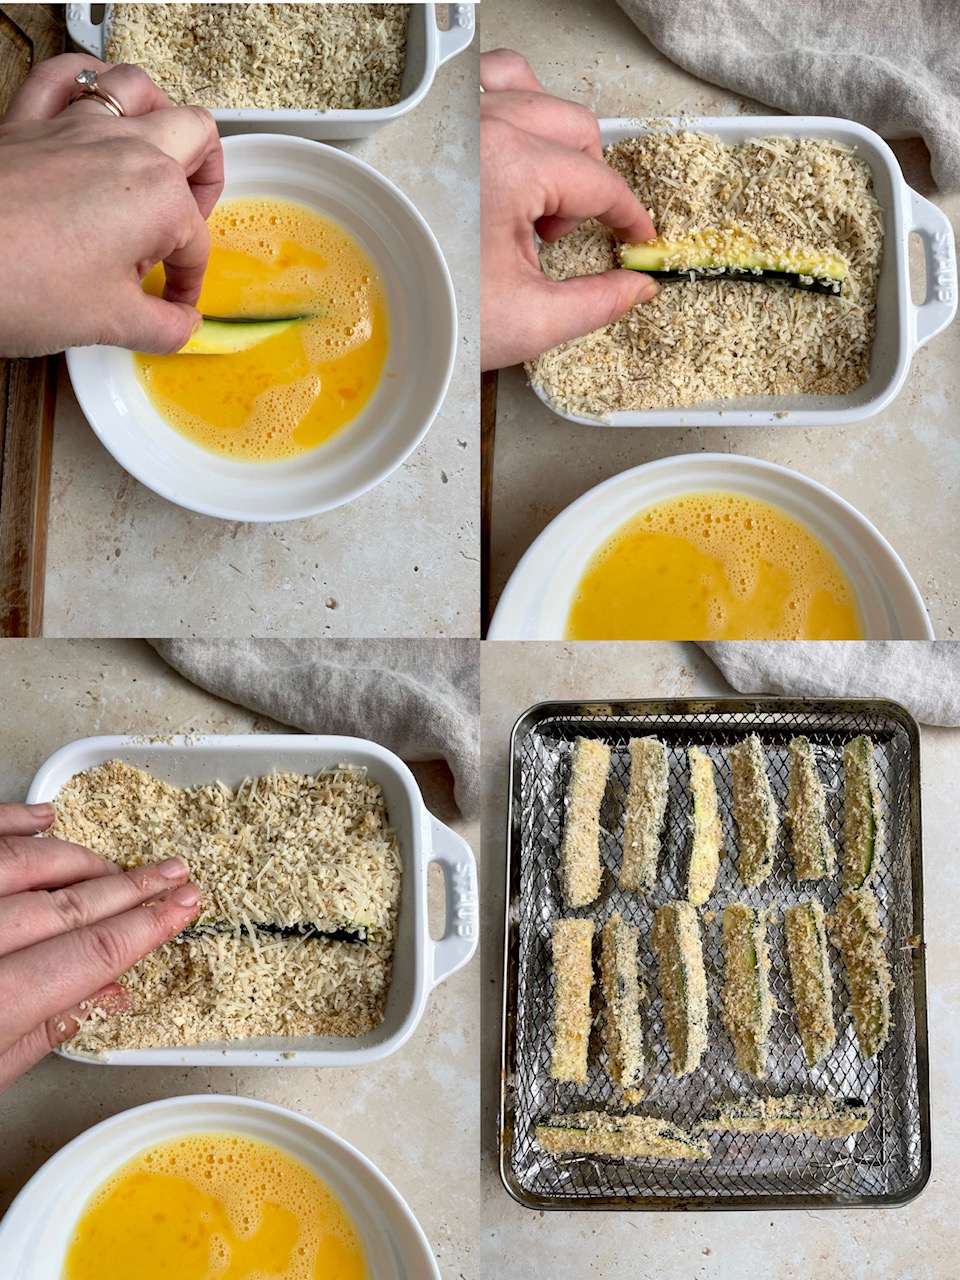 the process of dipping the zucchini fries in egg wash, coating in breadcrumbs and placing on air fryer basket.